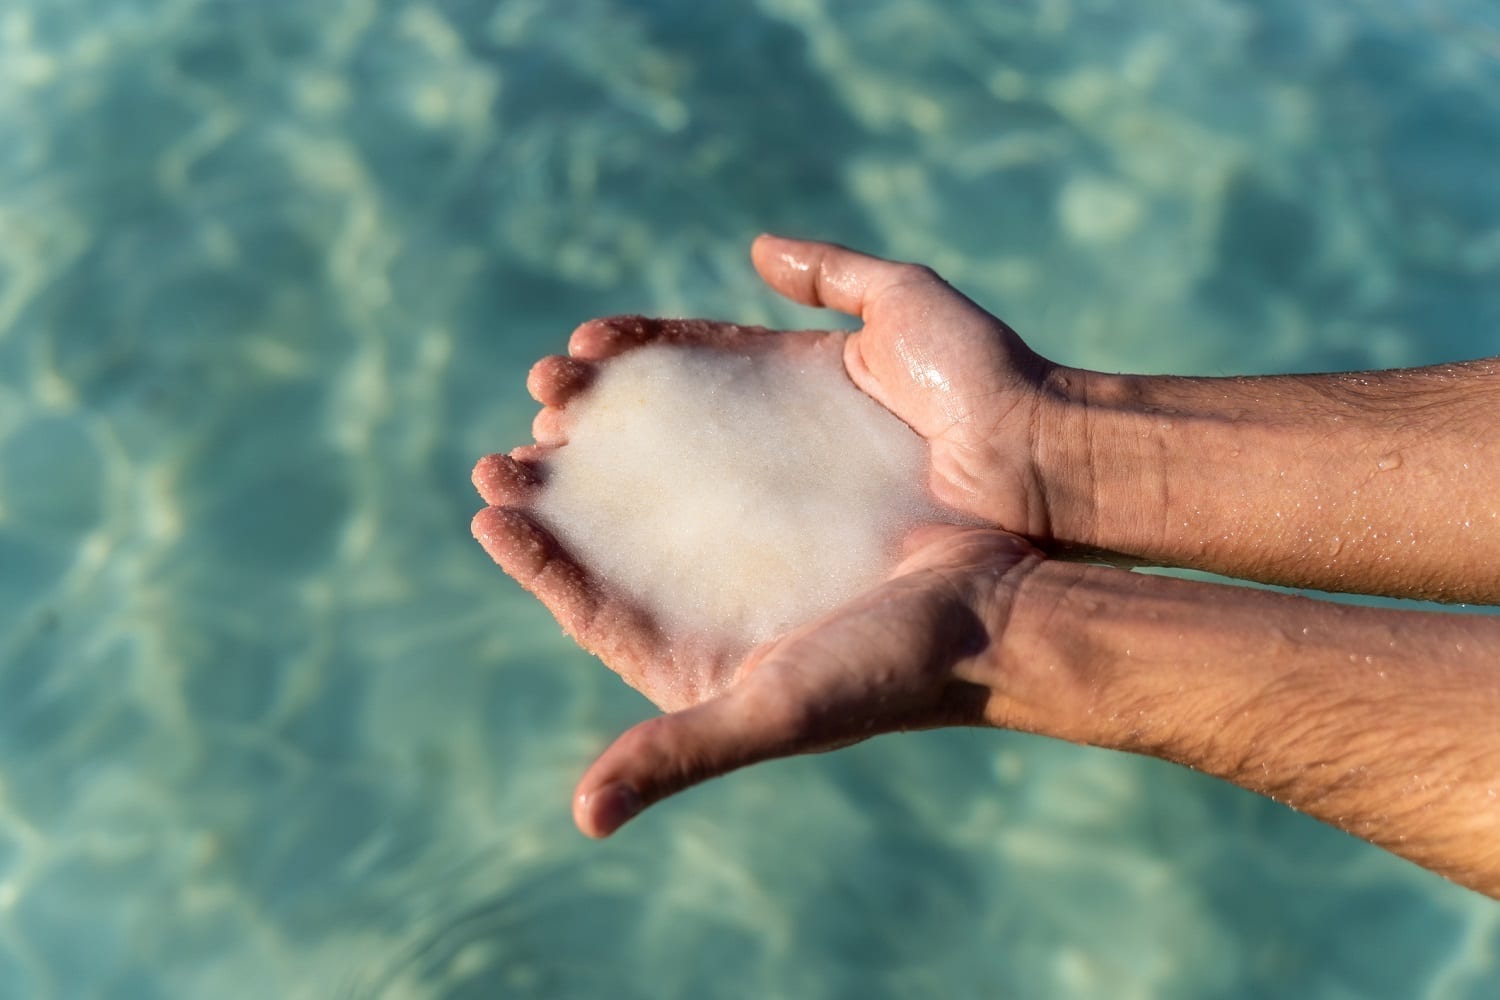 salt scooped up from the Dead Sea in a man's hands: ID 148173764 © NDStock | Dreamstime.com